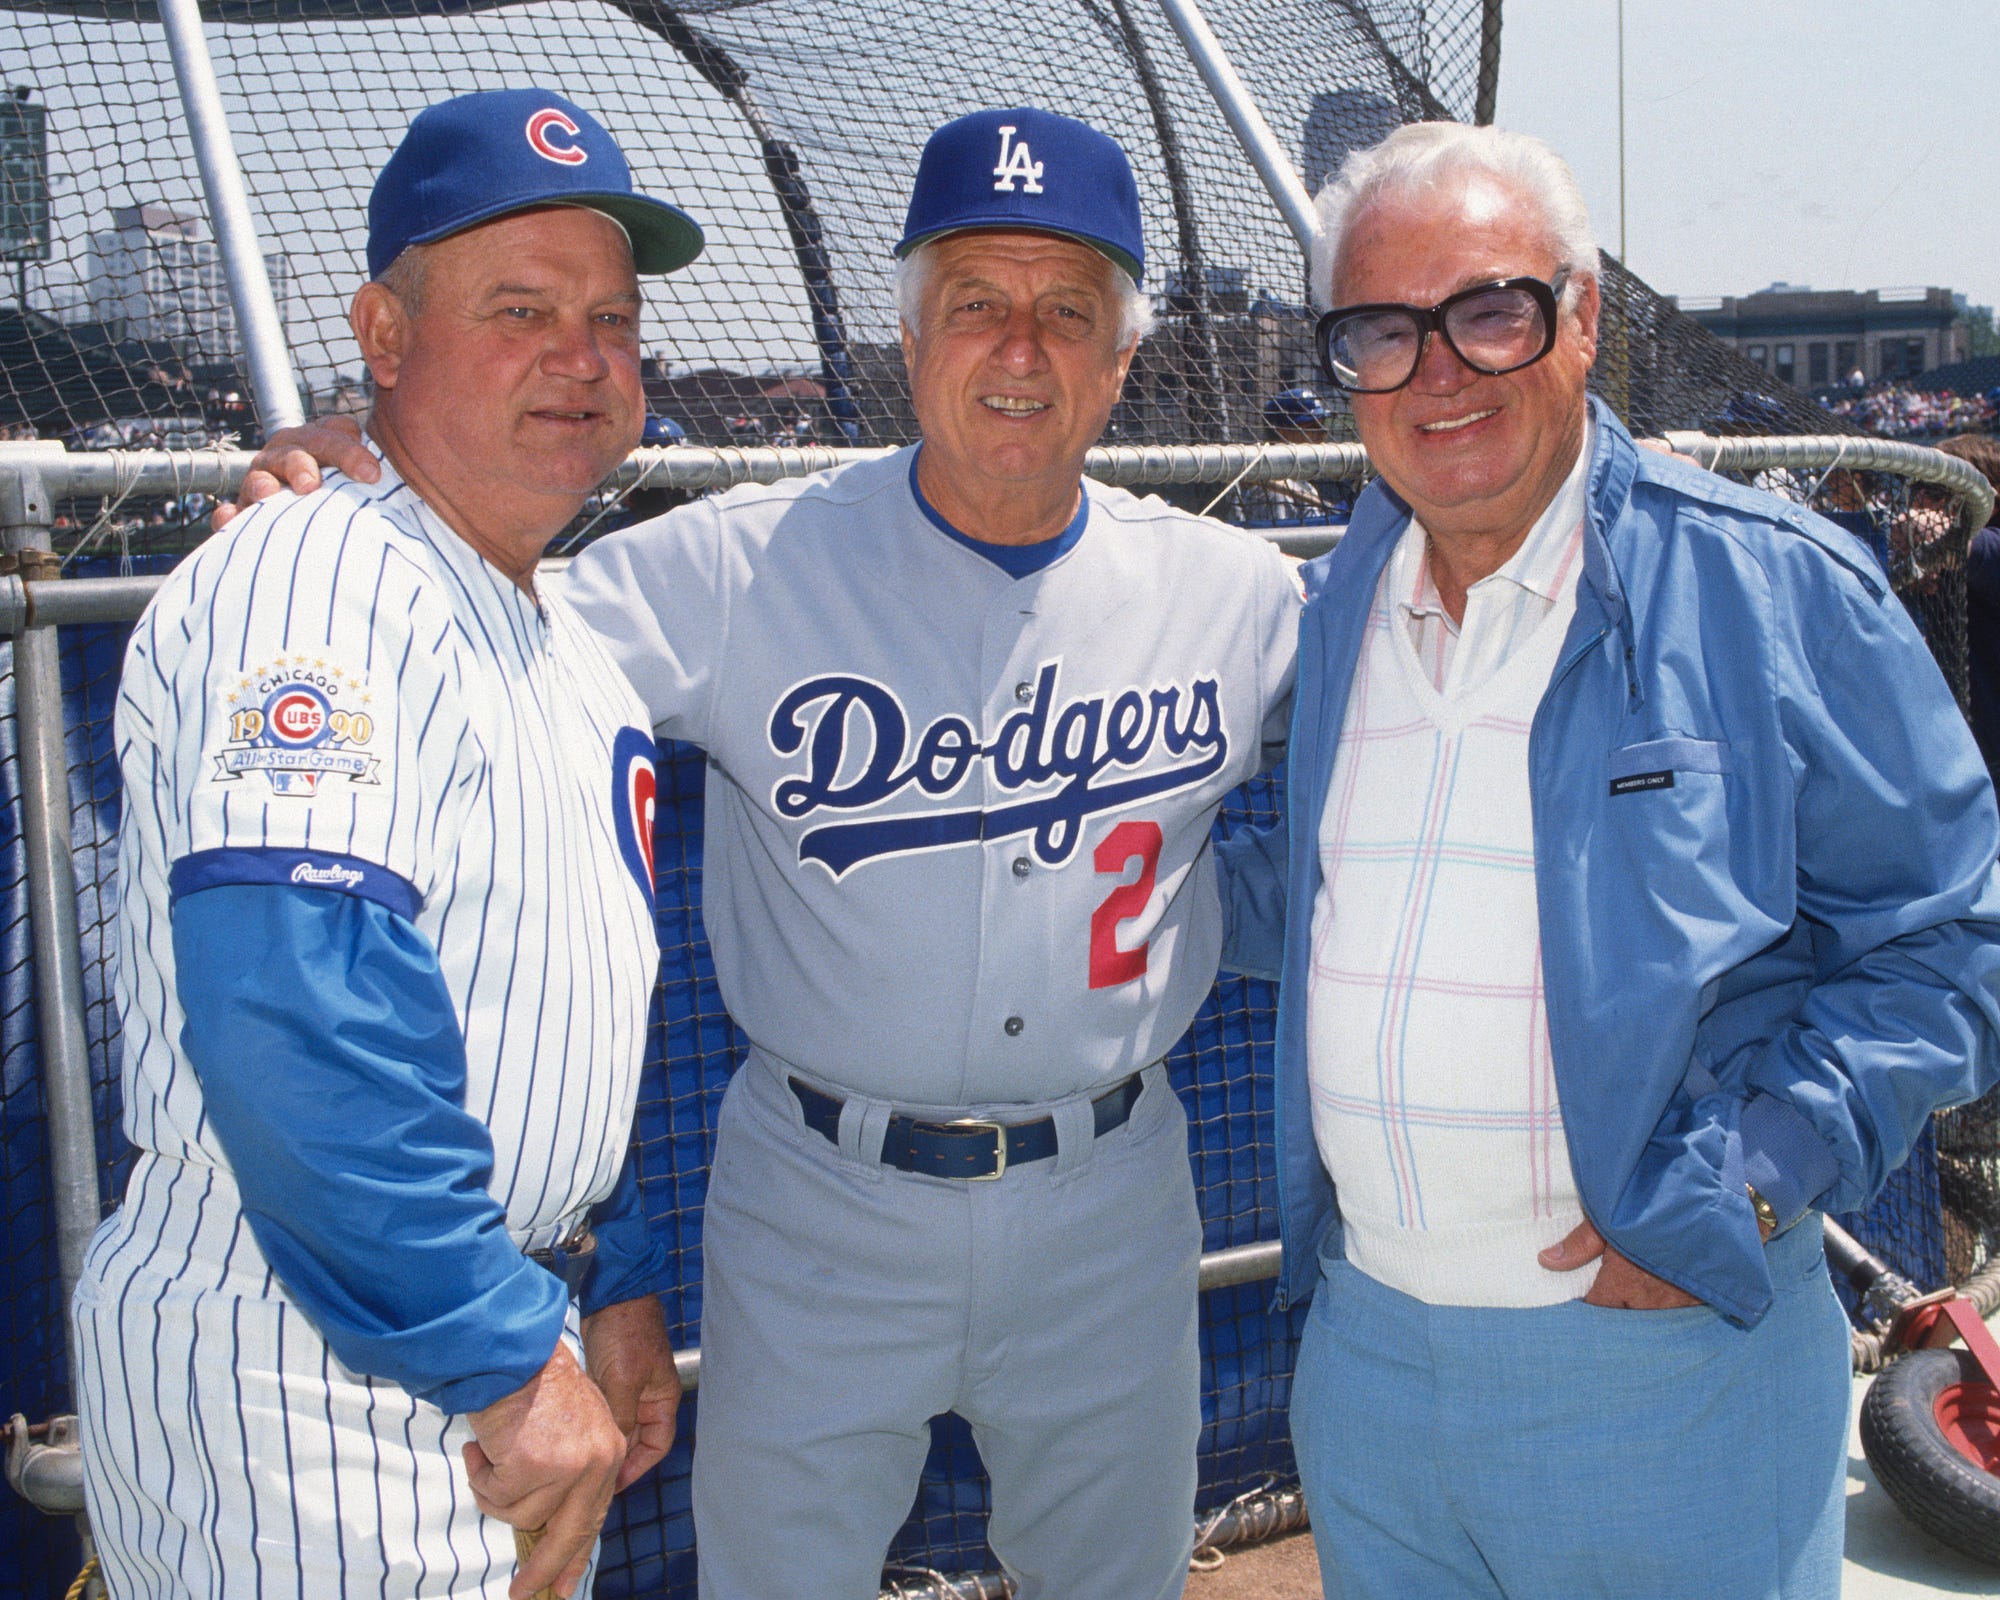 Photos: One year later, remembering Tommy Lasorda - Dodger Insider